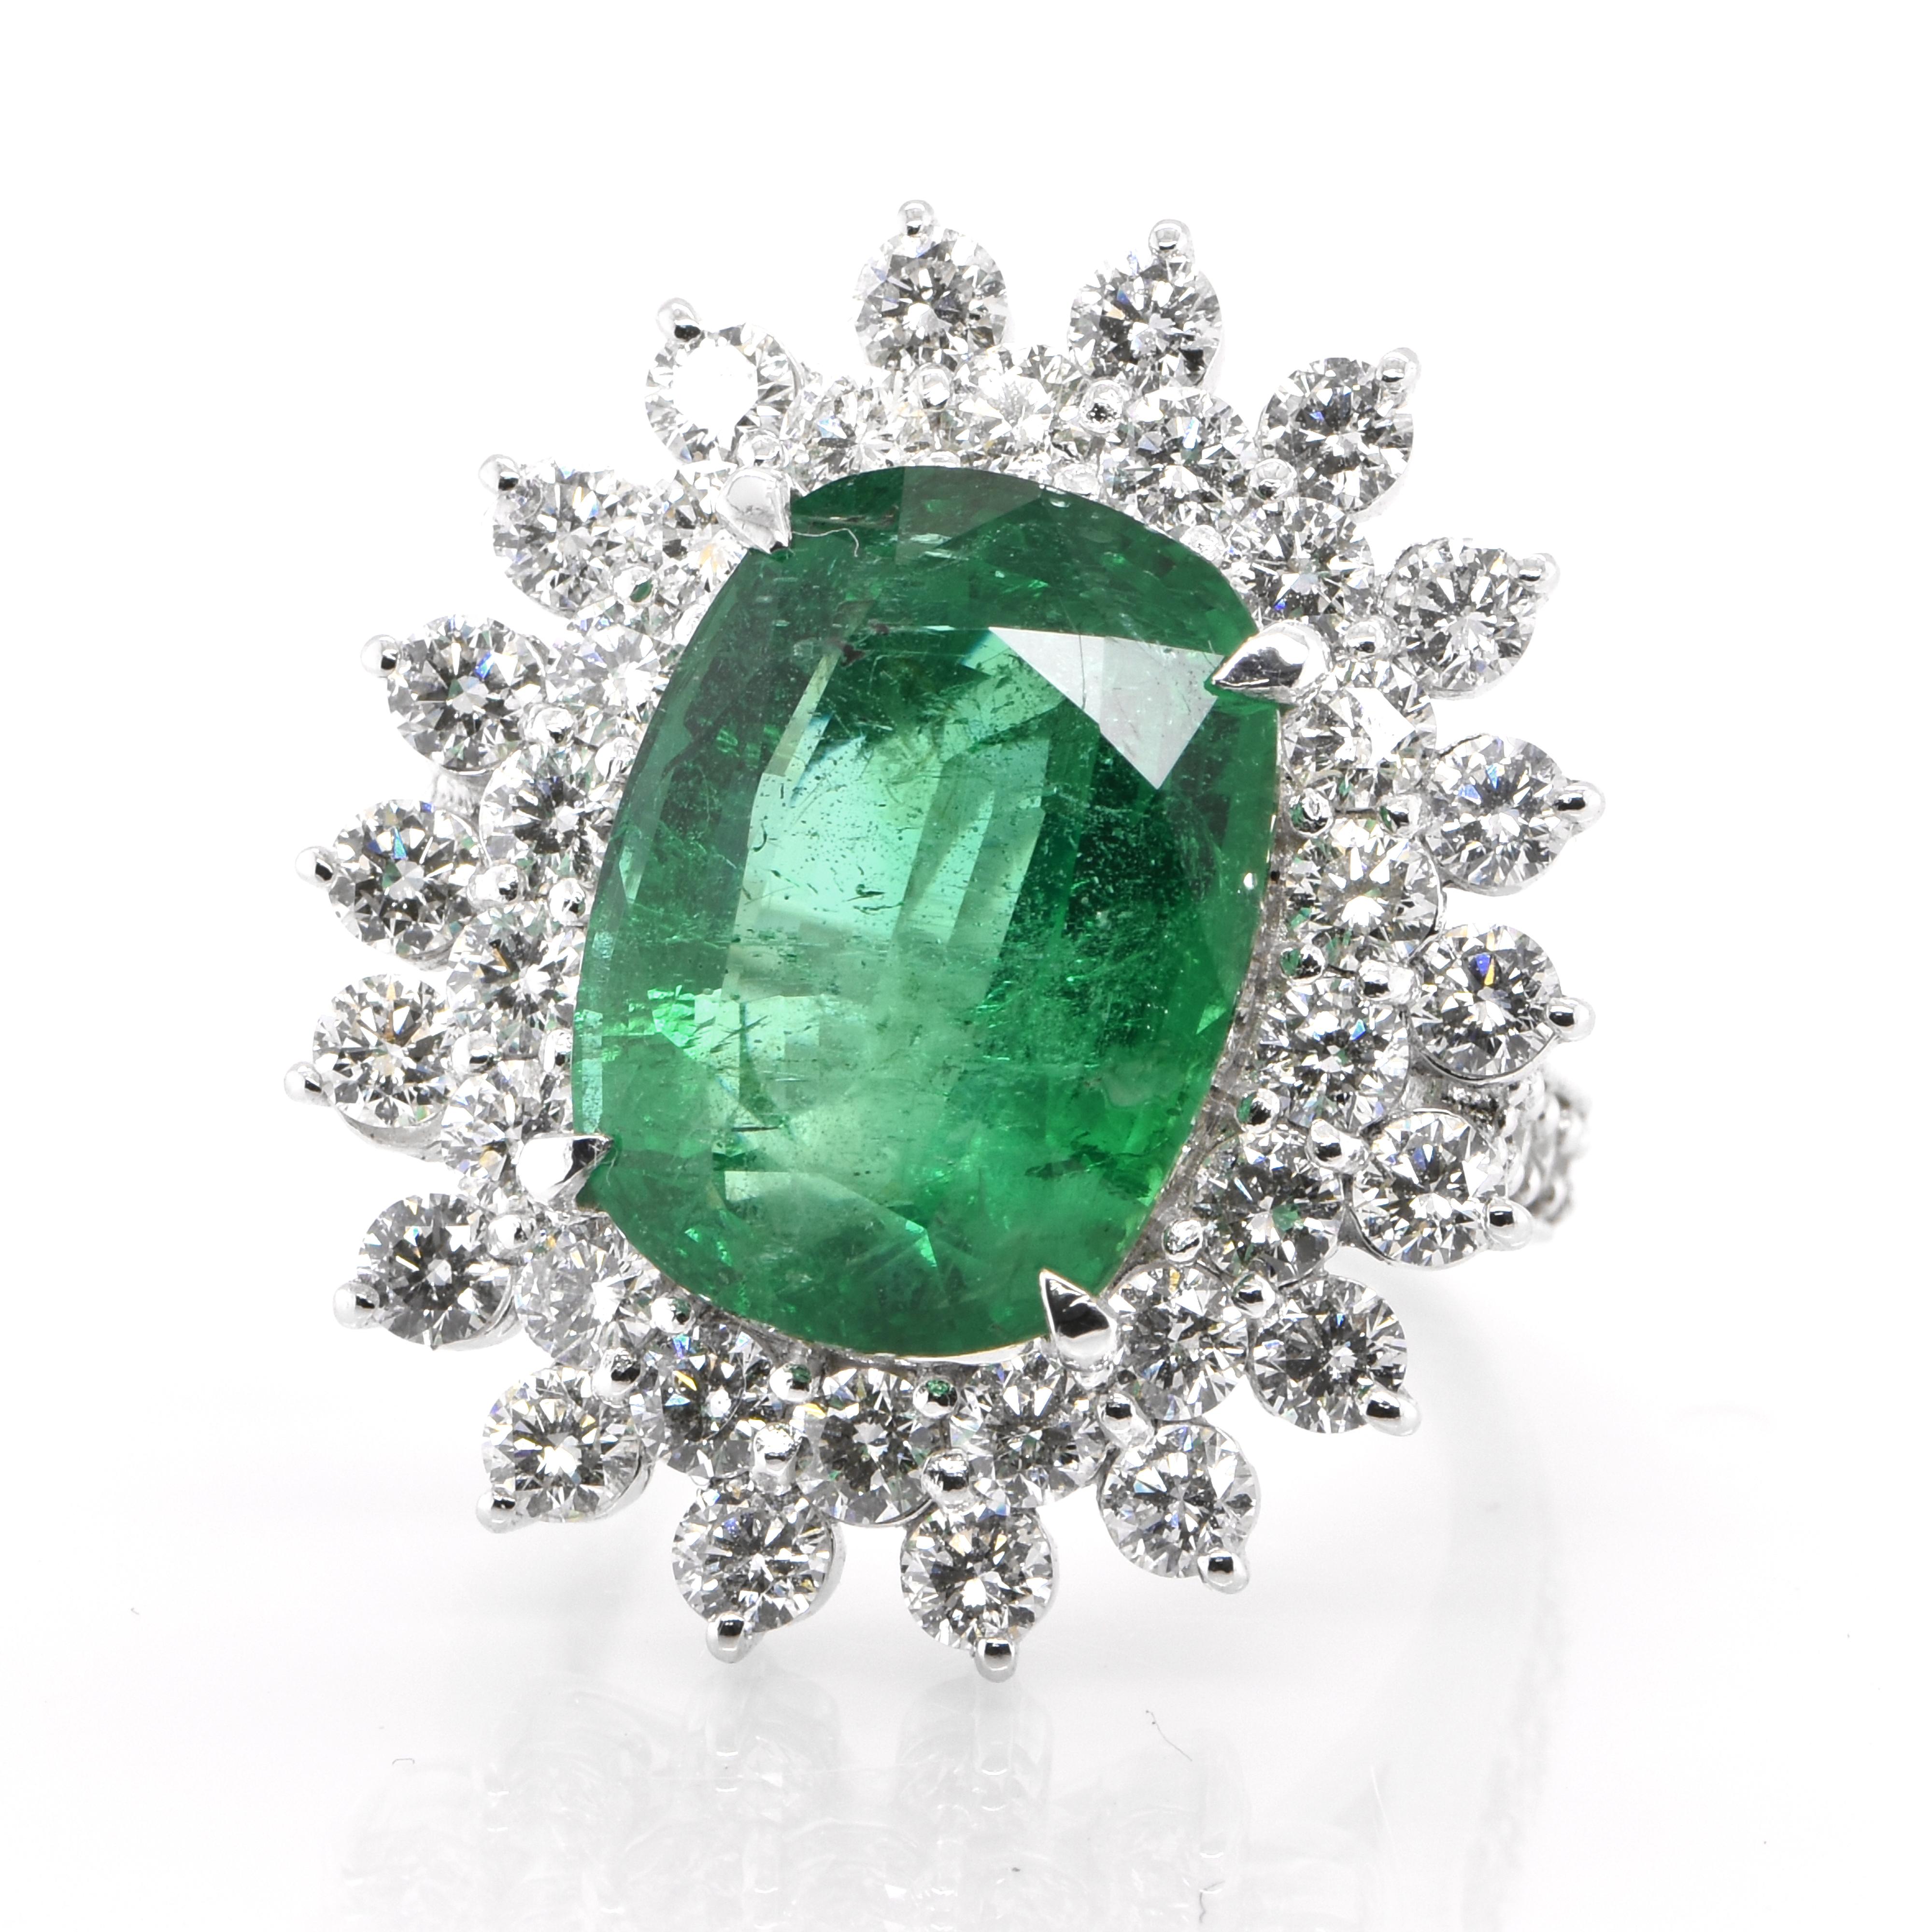 A stunning double halo cocktail ring featuring a 9.37 Carat Natural Emerald and 3.20 Carats of Diamond Accents set in Platinum. People have admired emerald’s green for thousands of years. Emeralds have always been associated with the lushest